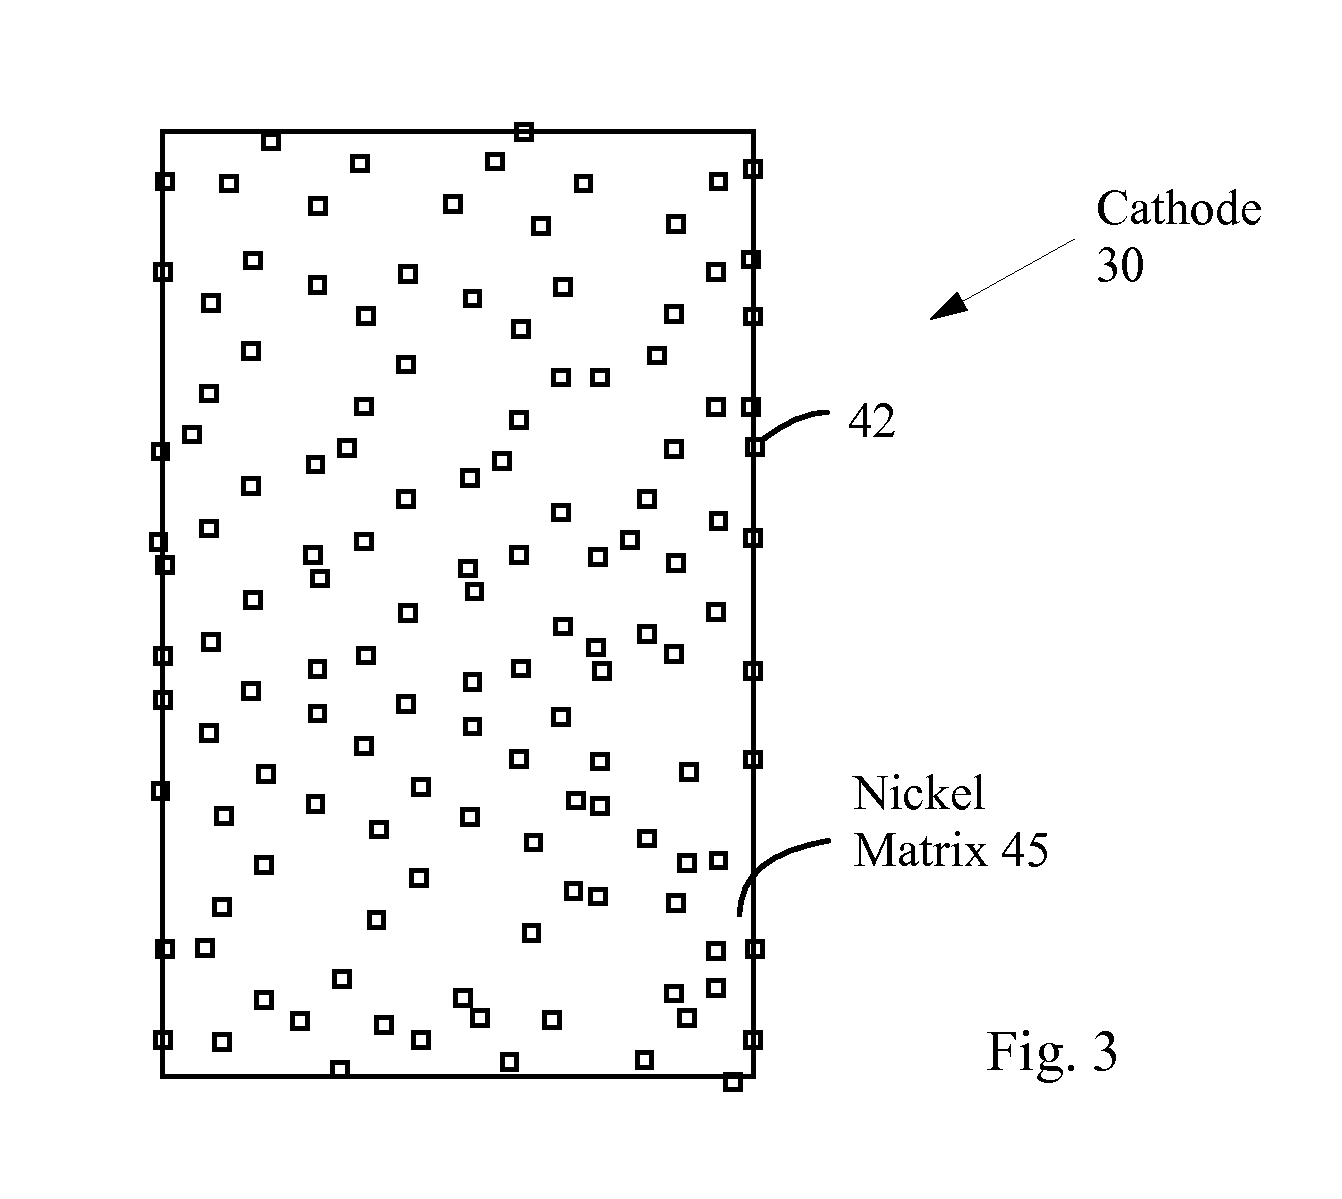 Apparatus and Method for Low Energy Nuclear Reactions